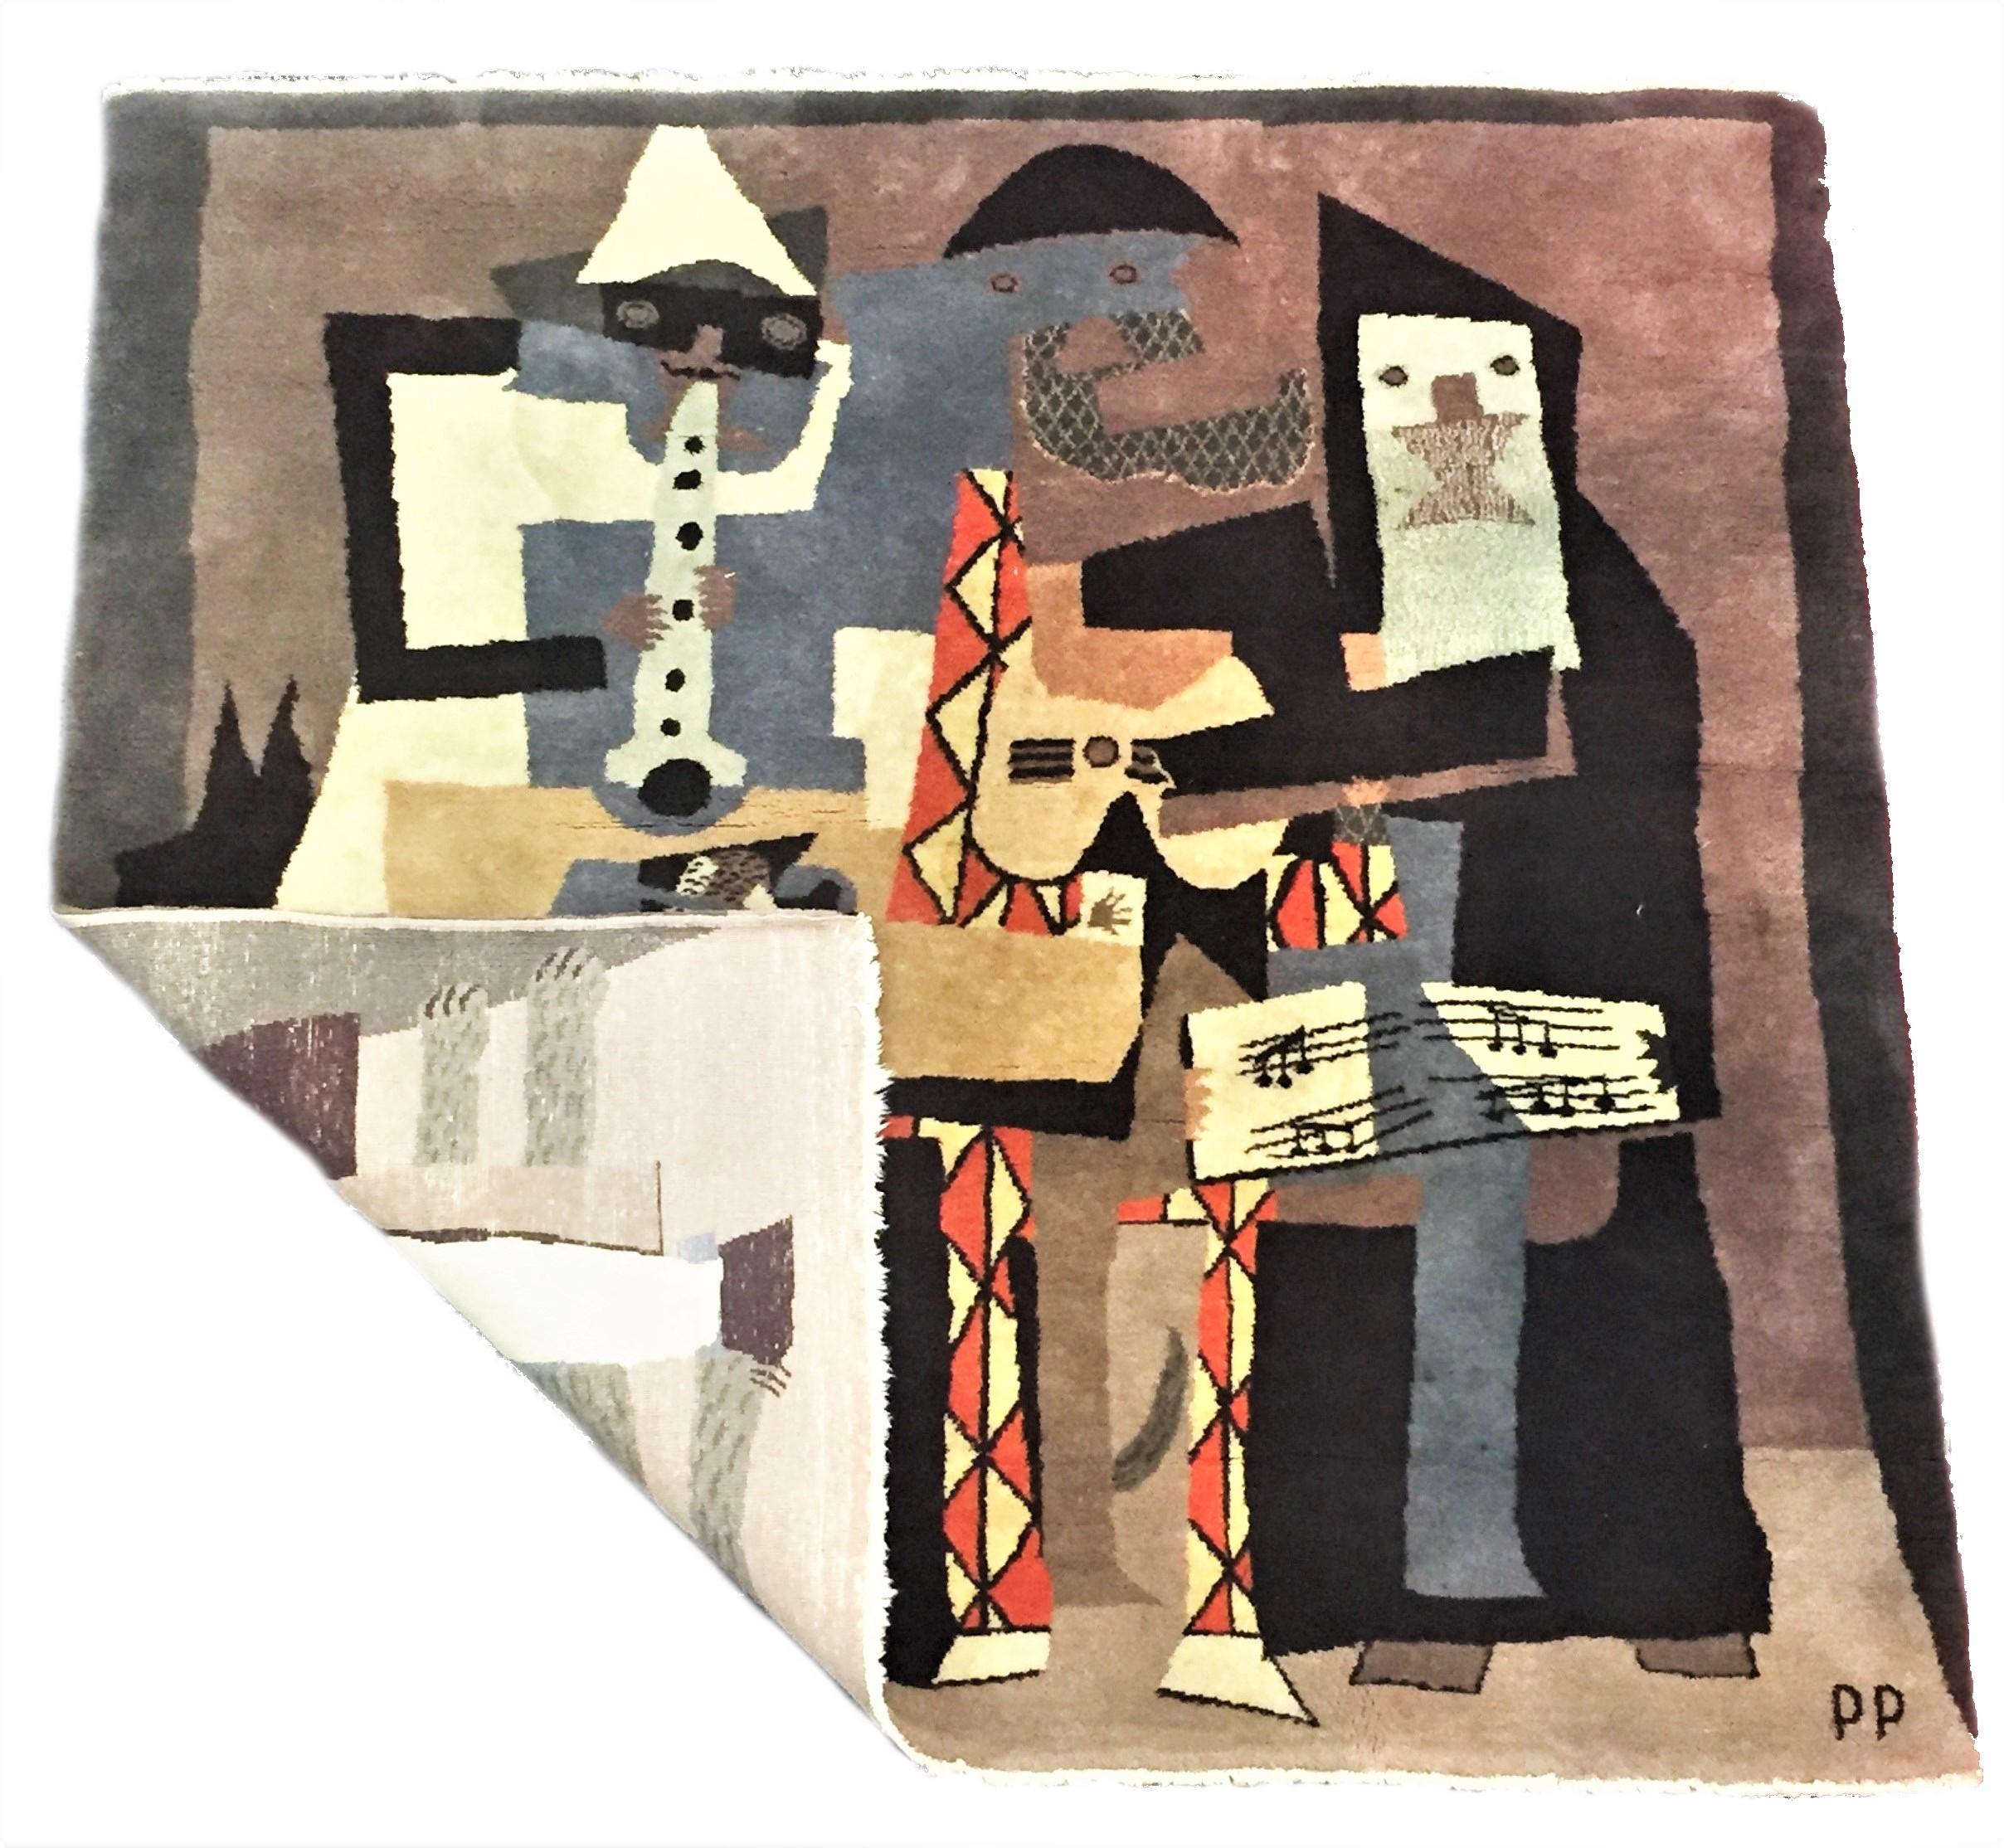 A Mid-Century Modern rug featuring an image of Pablo Picasso's work 